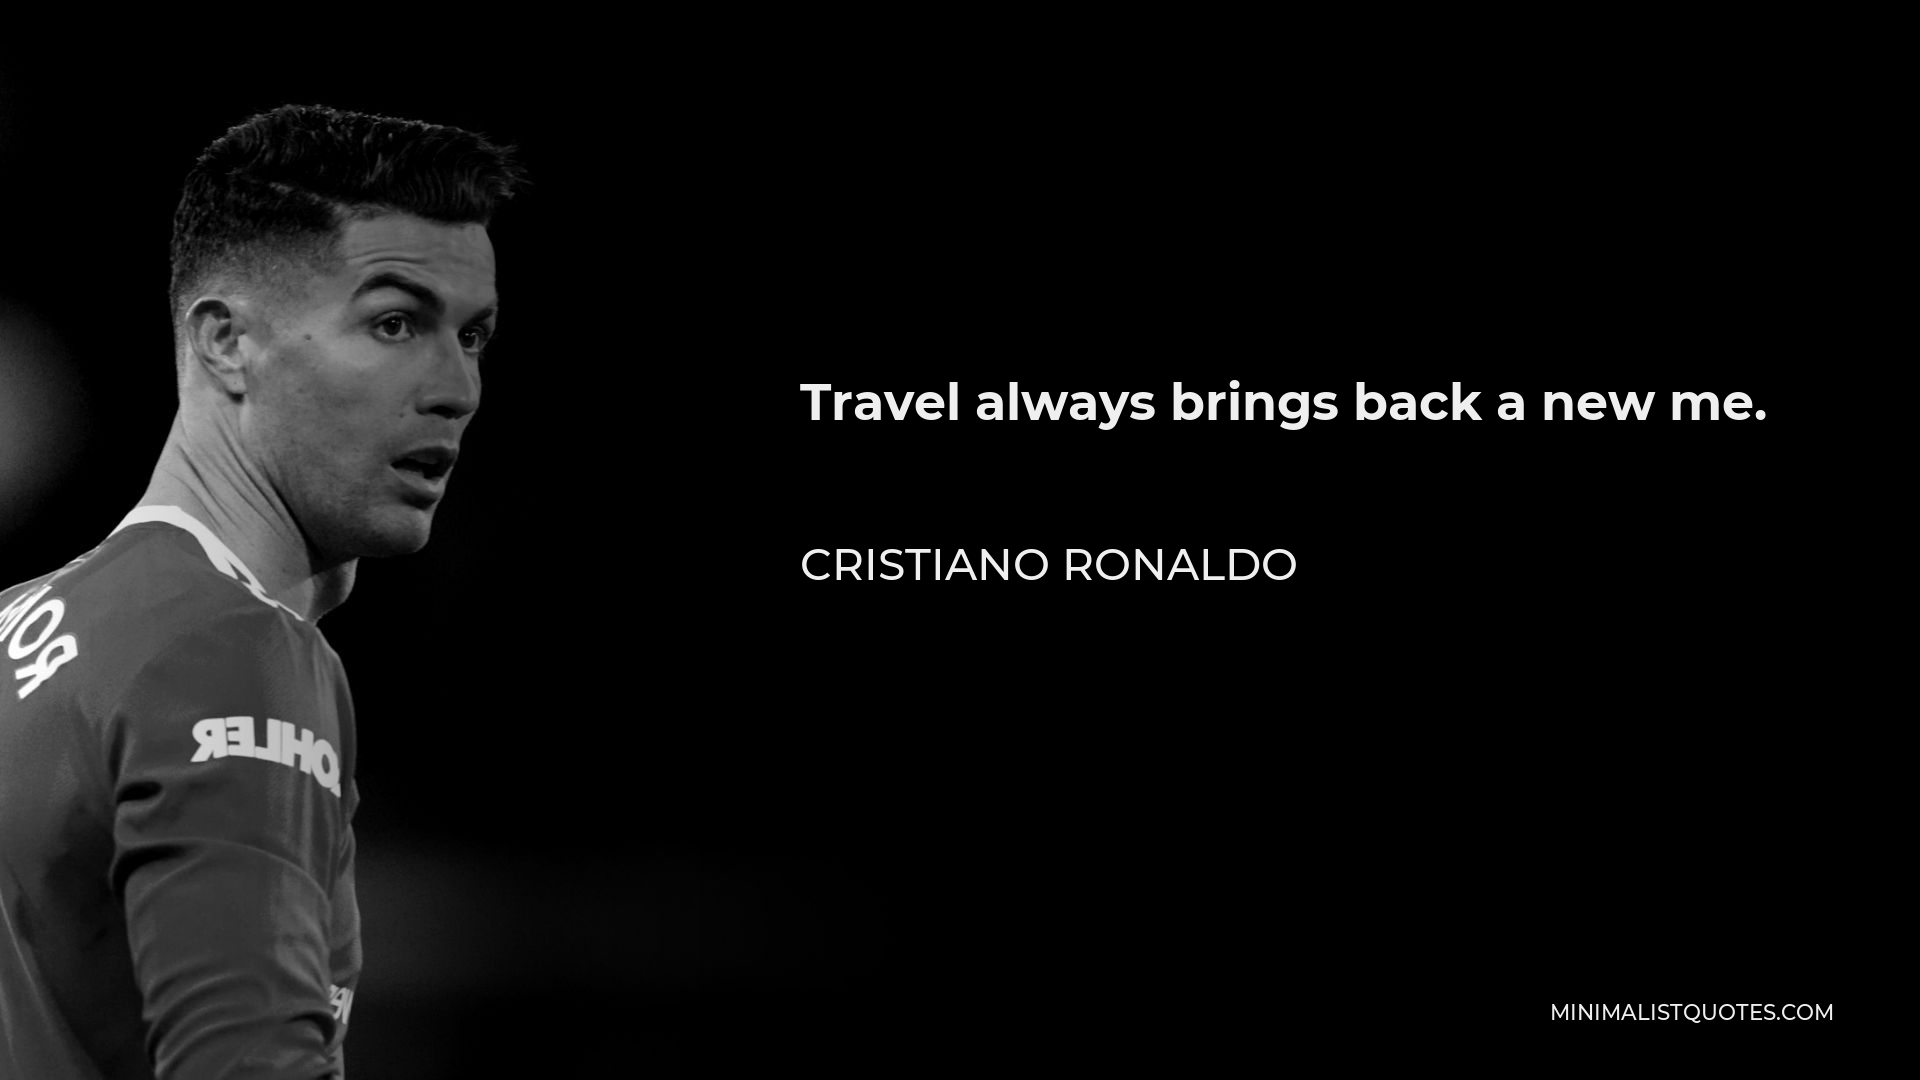 Cristiano Ronaldo Quote: Travel always brings back a new me